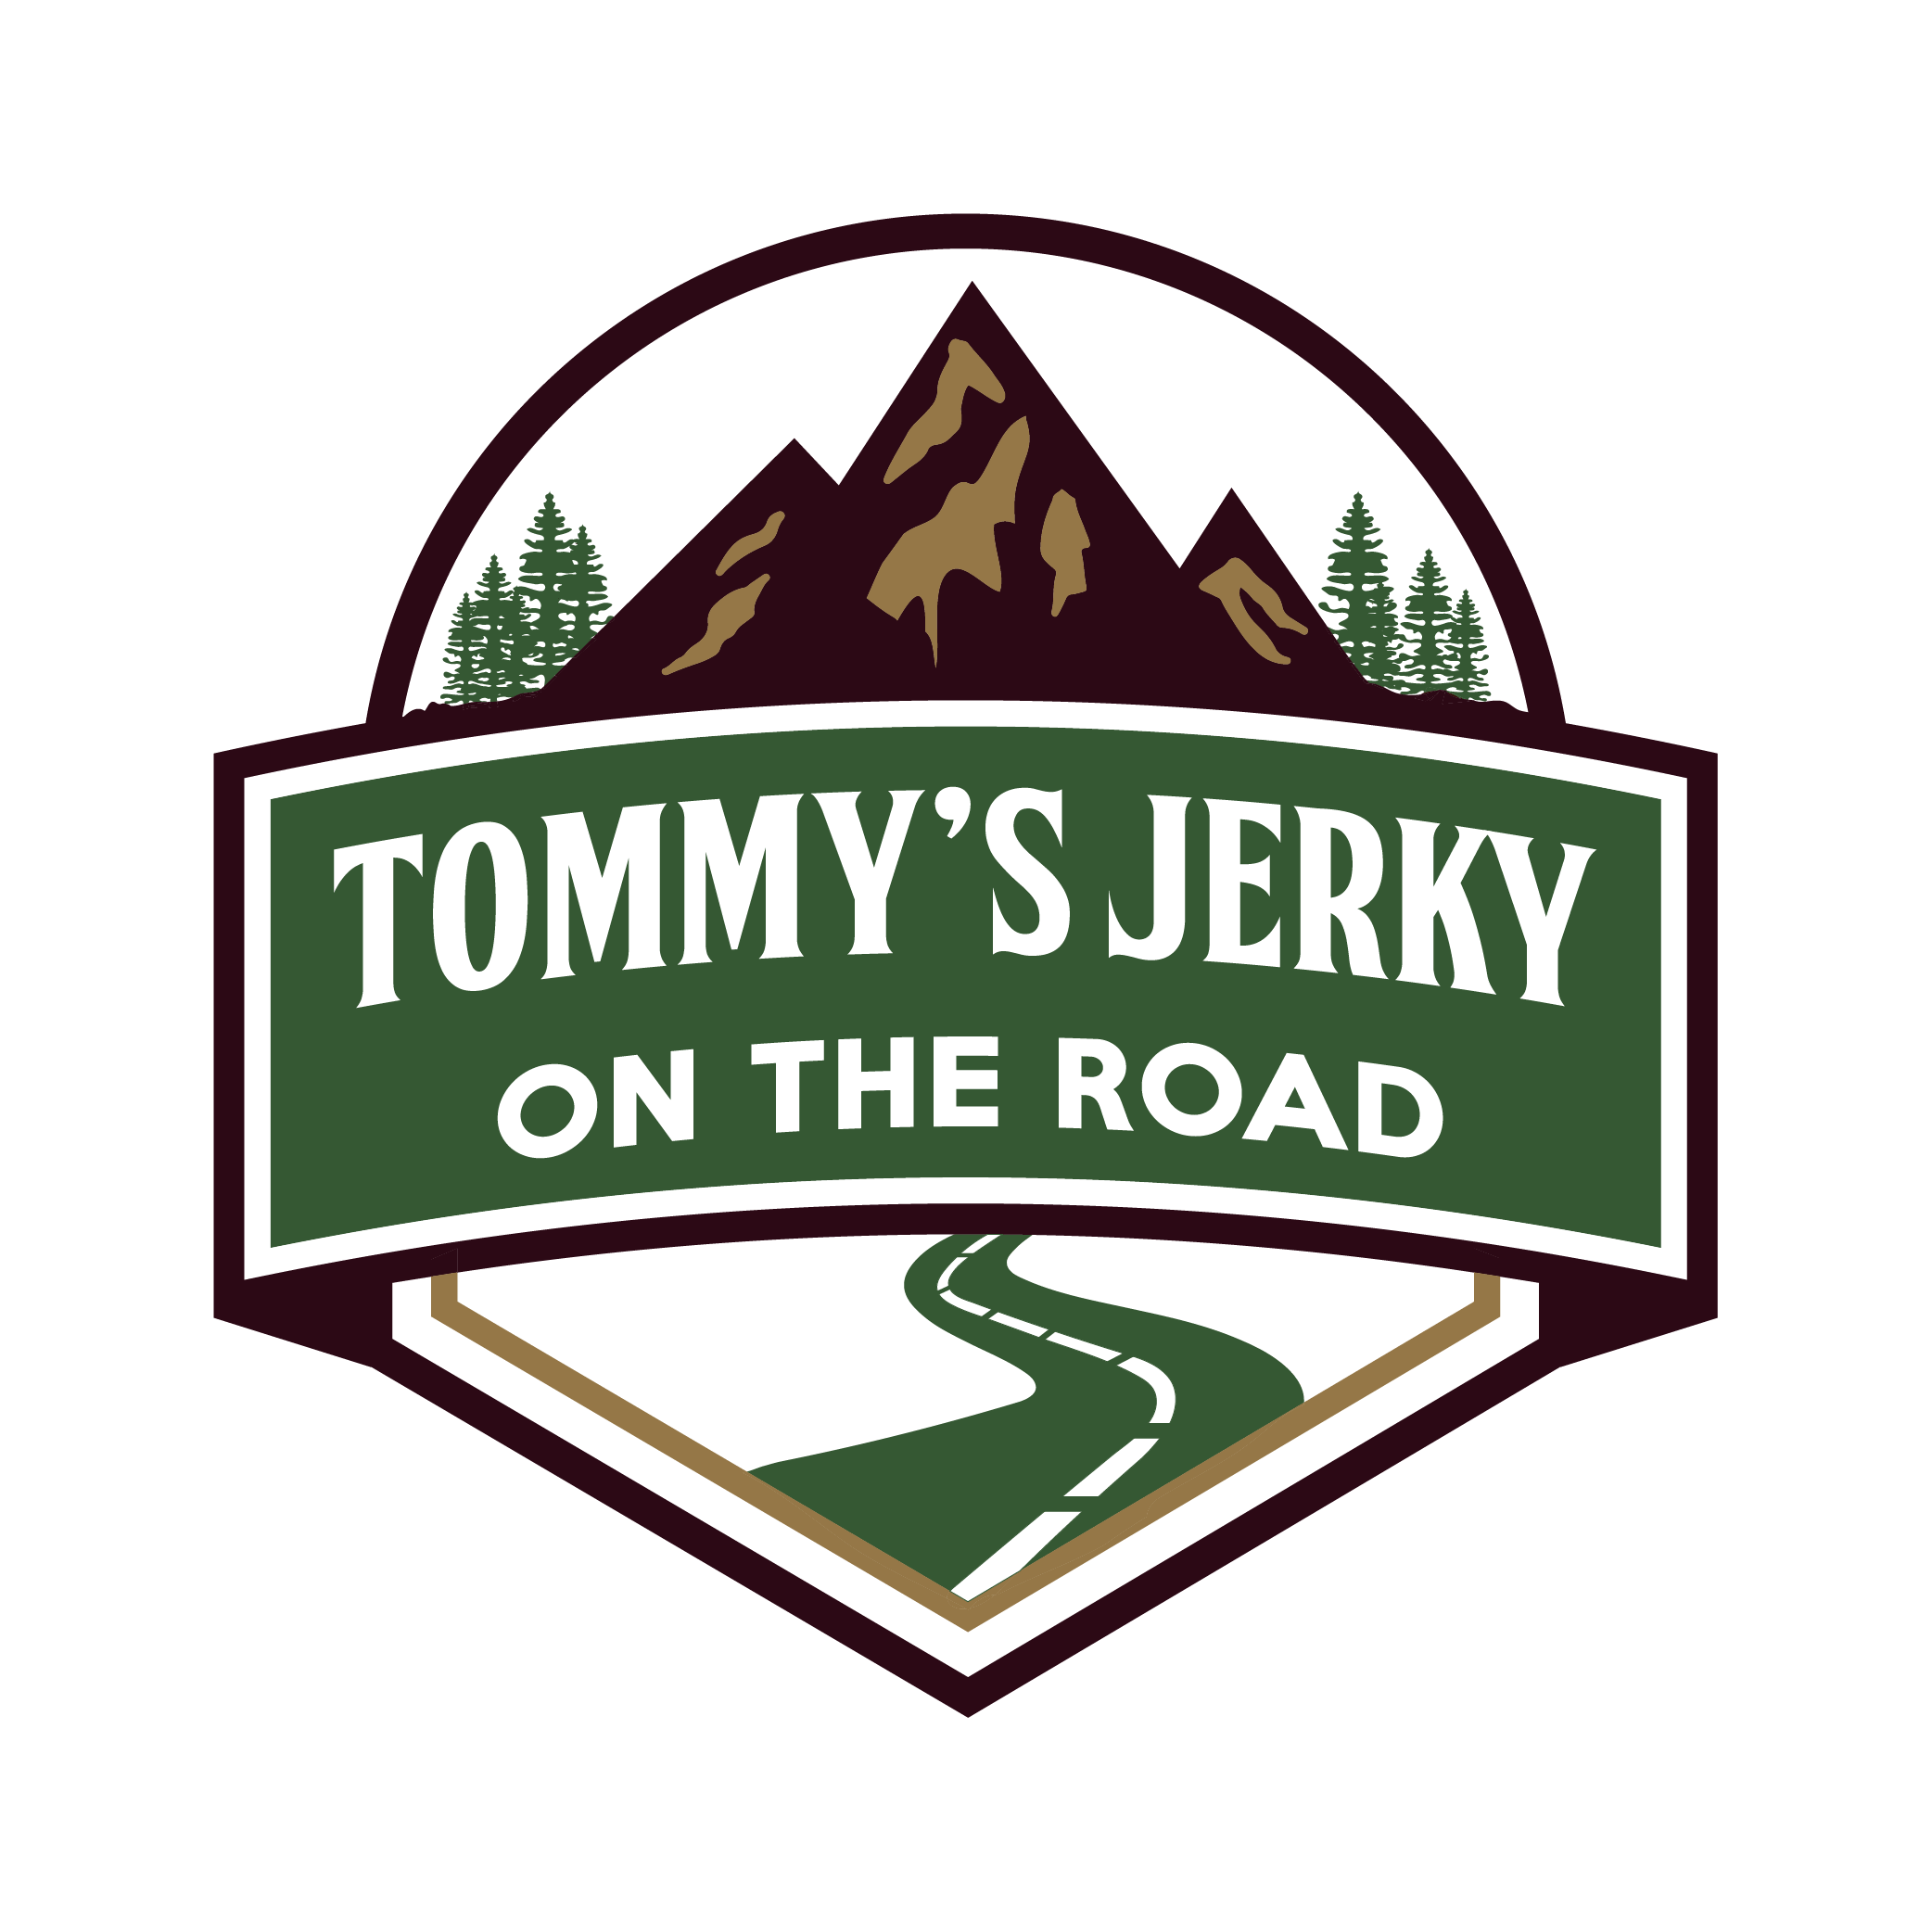 Tommy's Jerky On The Road logo with white splatter